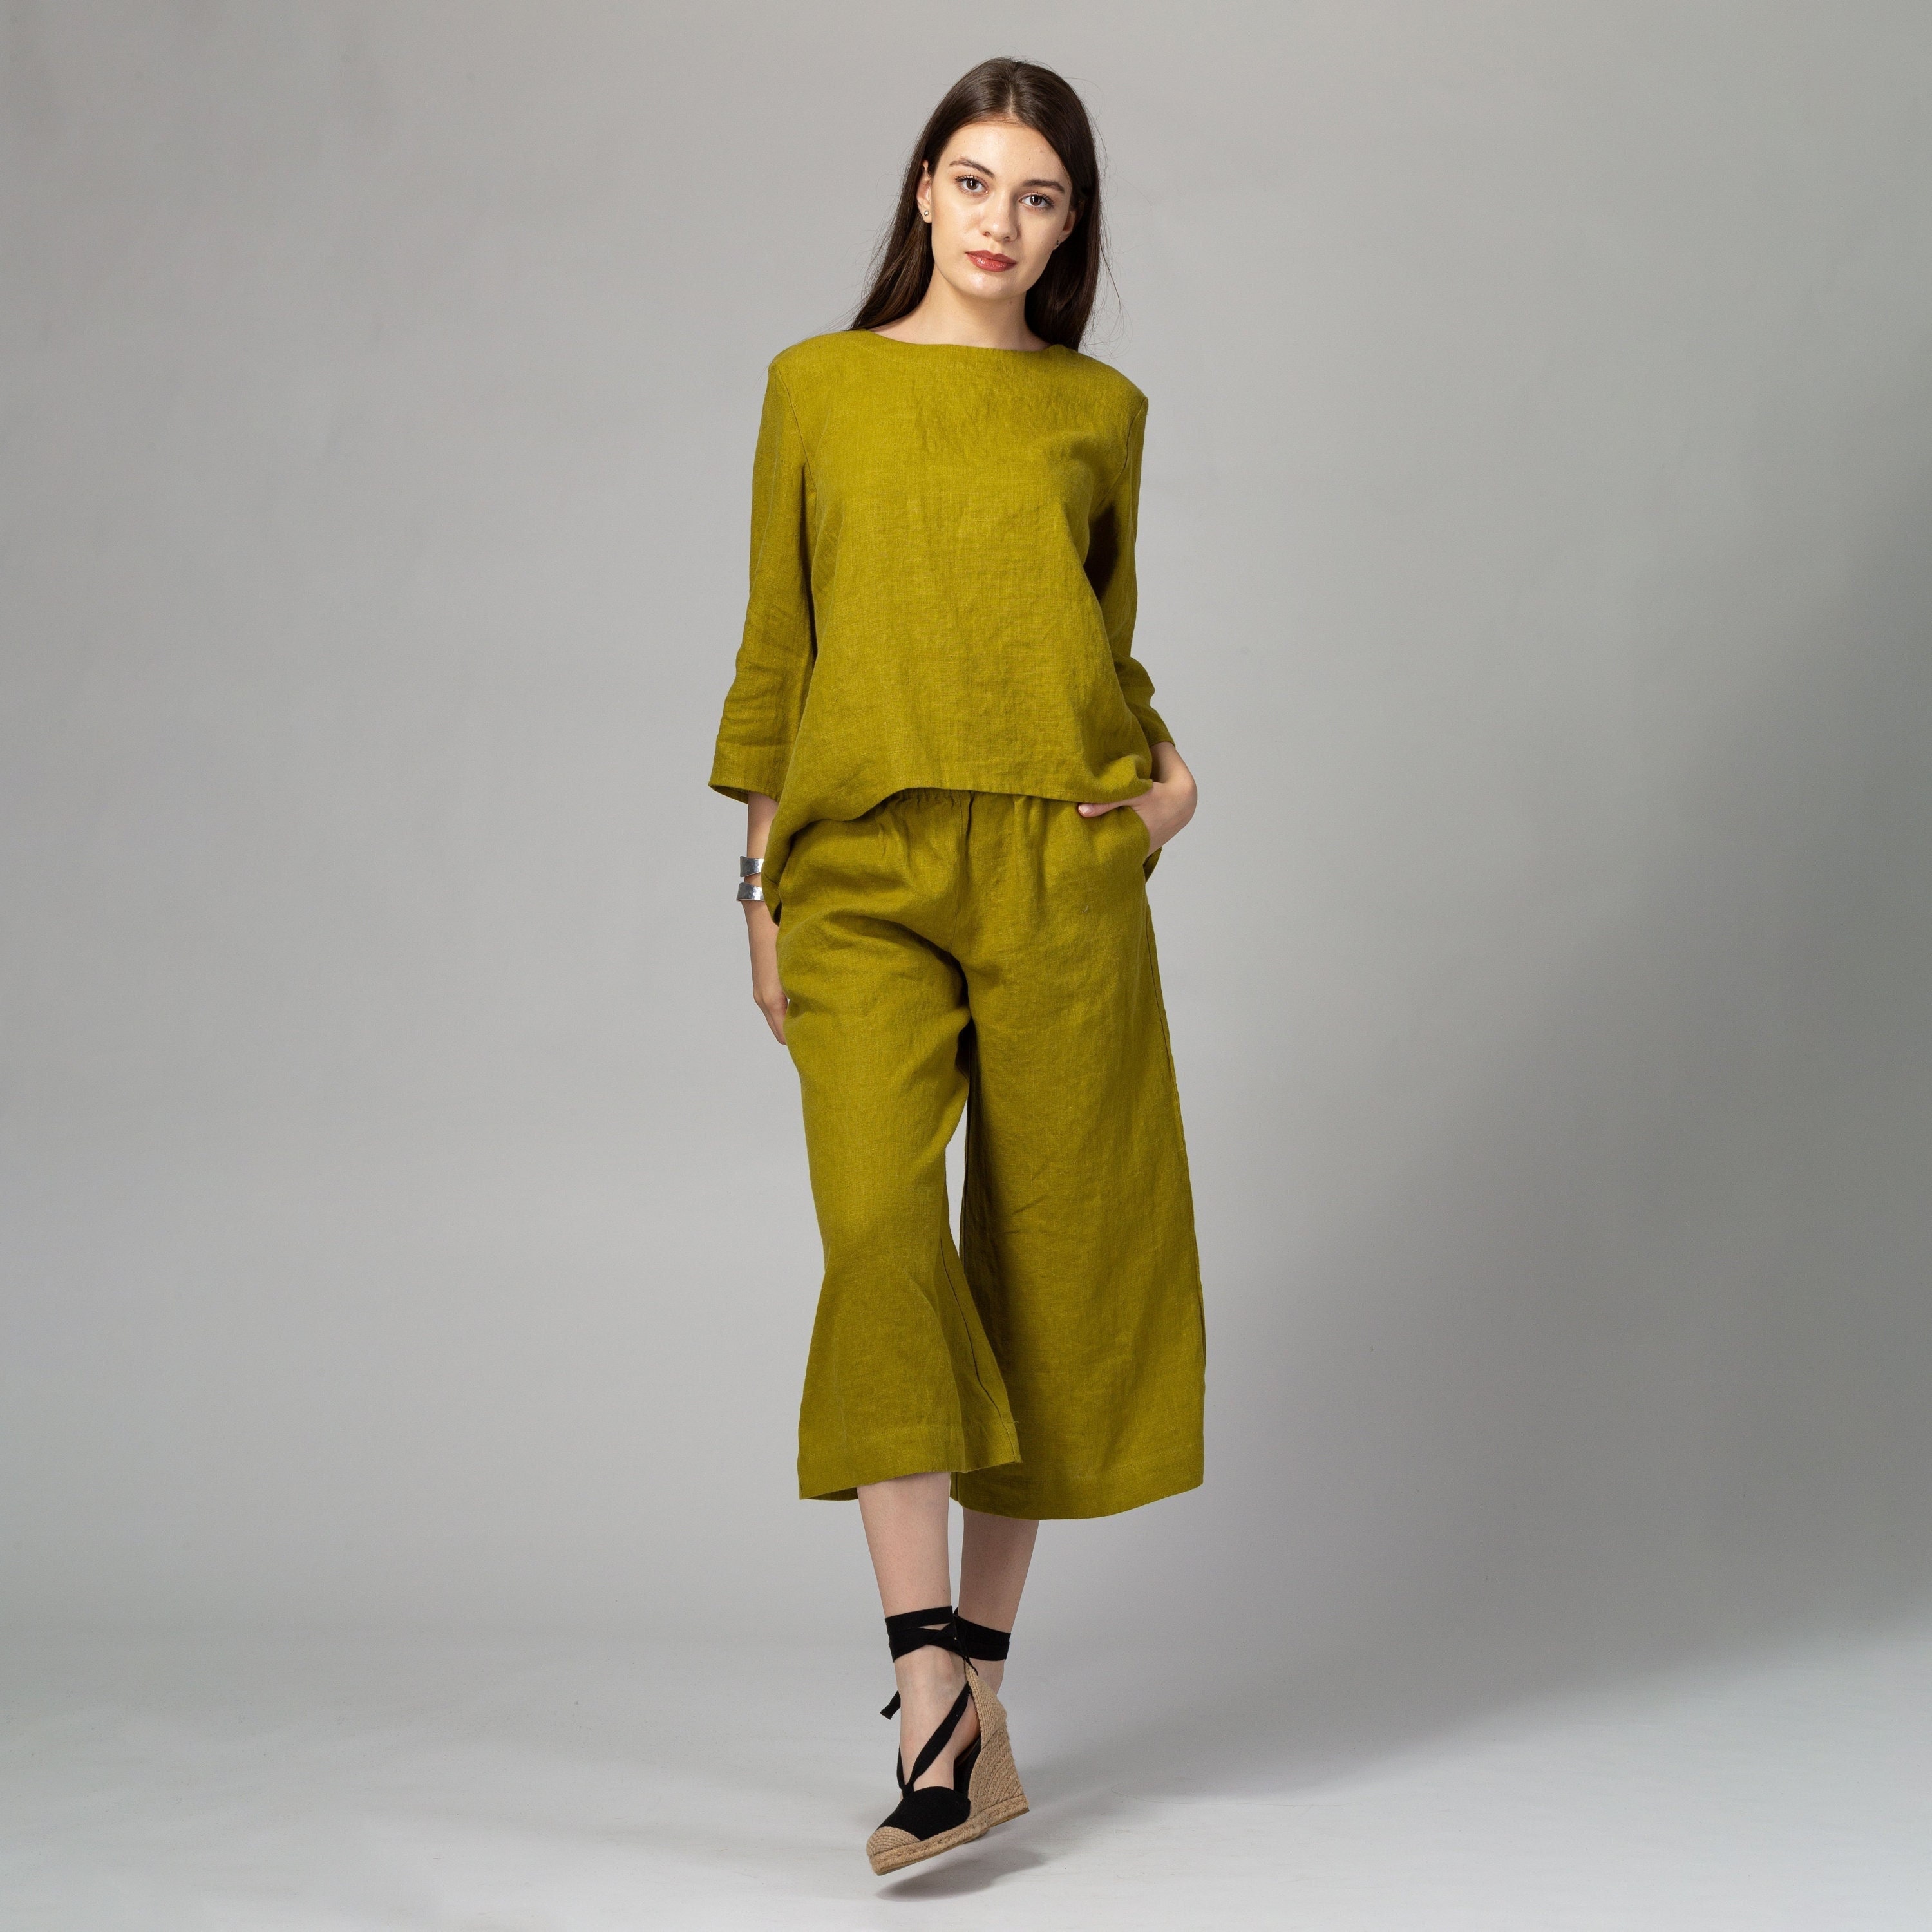 NECHOLOGY Womens Pants Crop Pants for Women Casual Summer Womens Culottes  Cotton Linen Wide Business Casual Pants for Women Petite Yellow Large